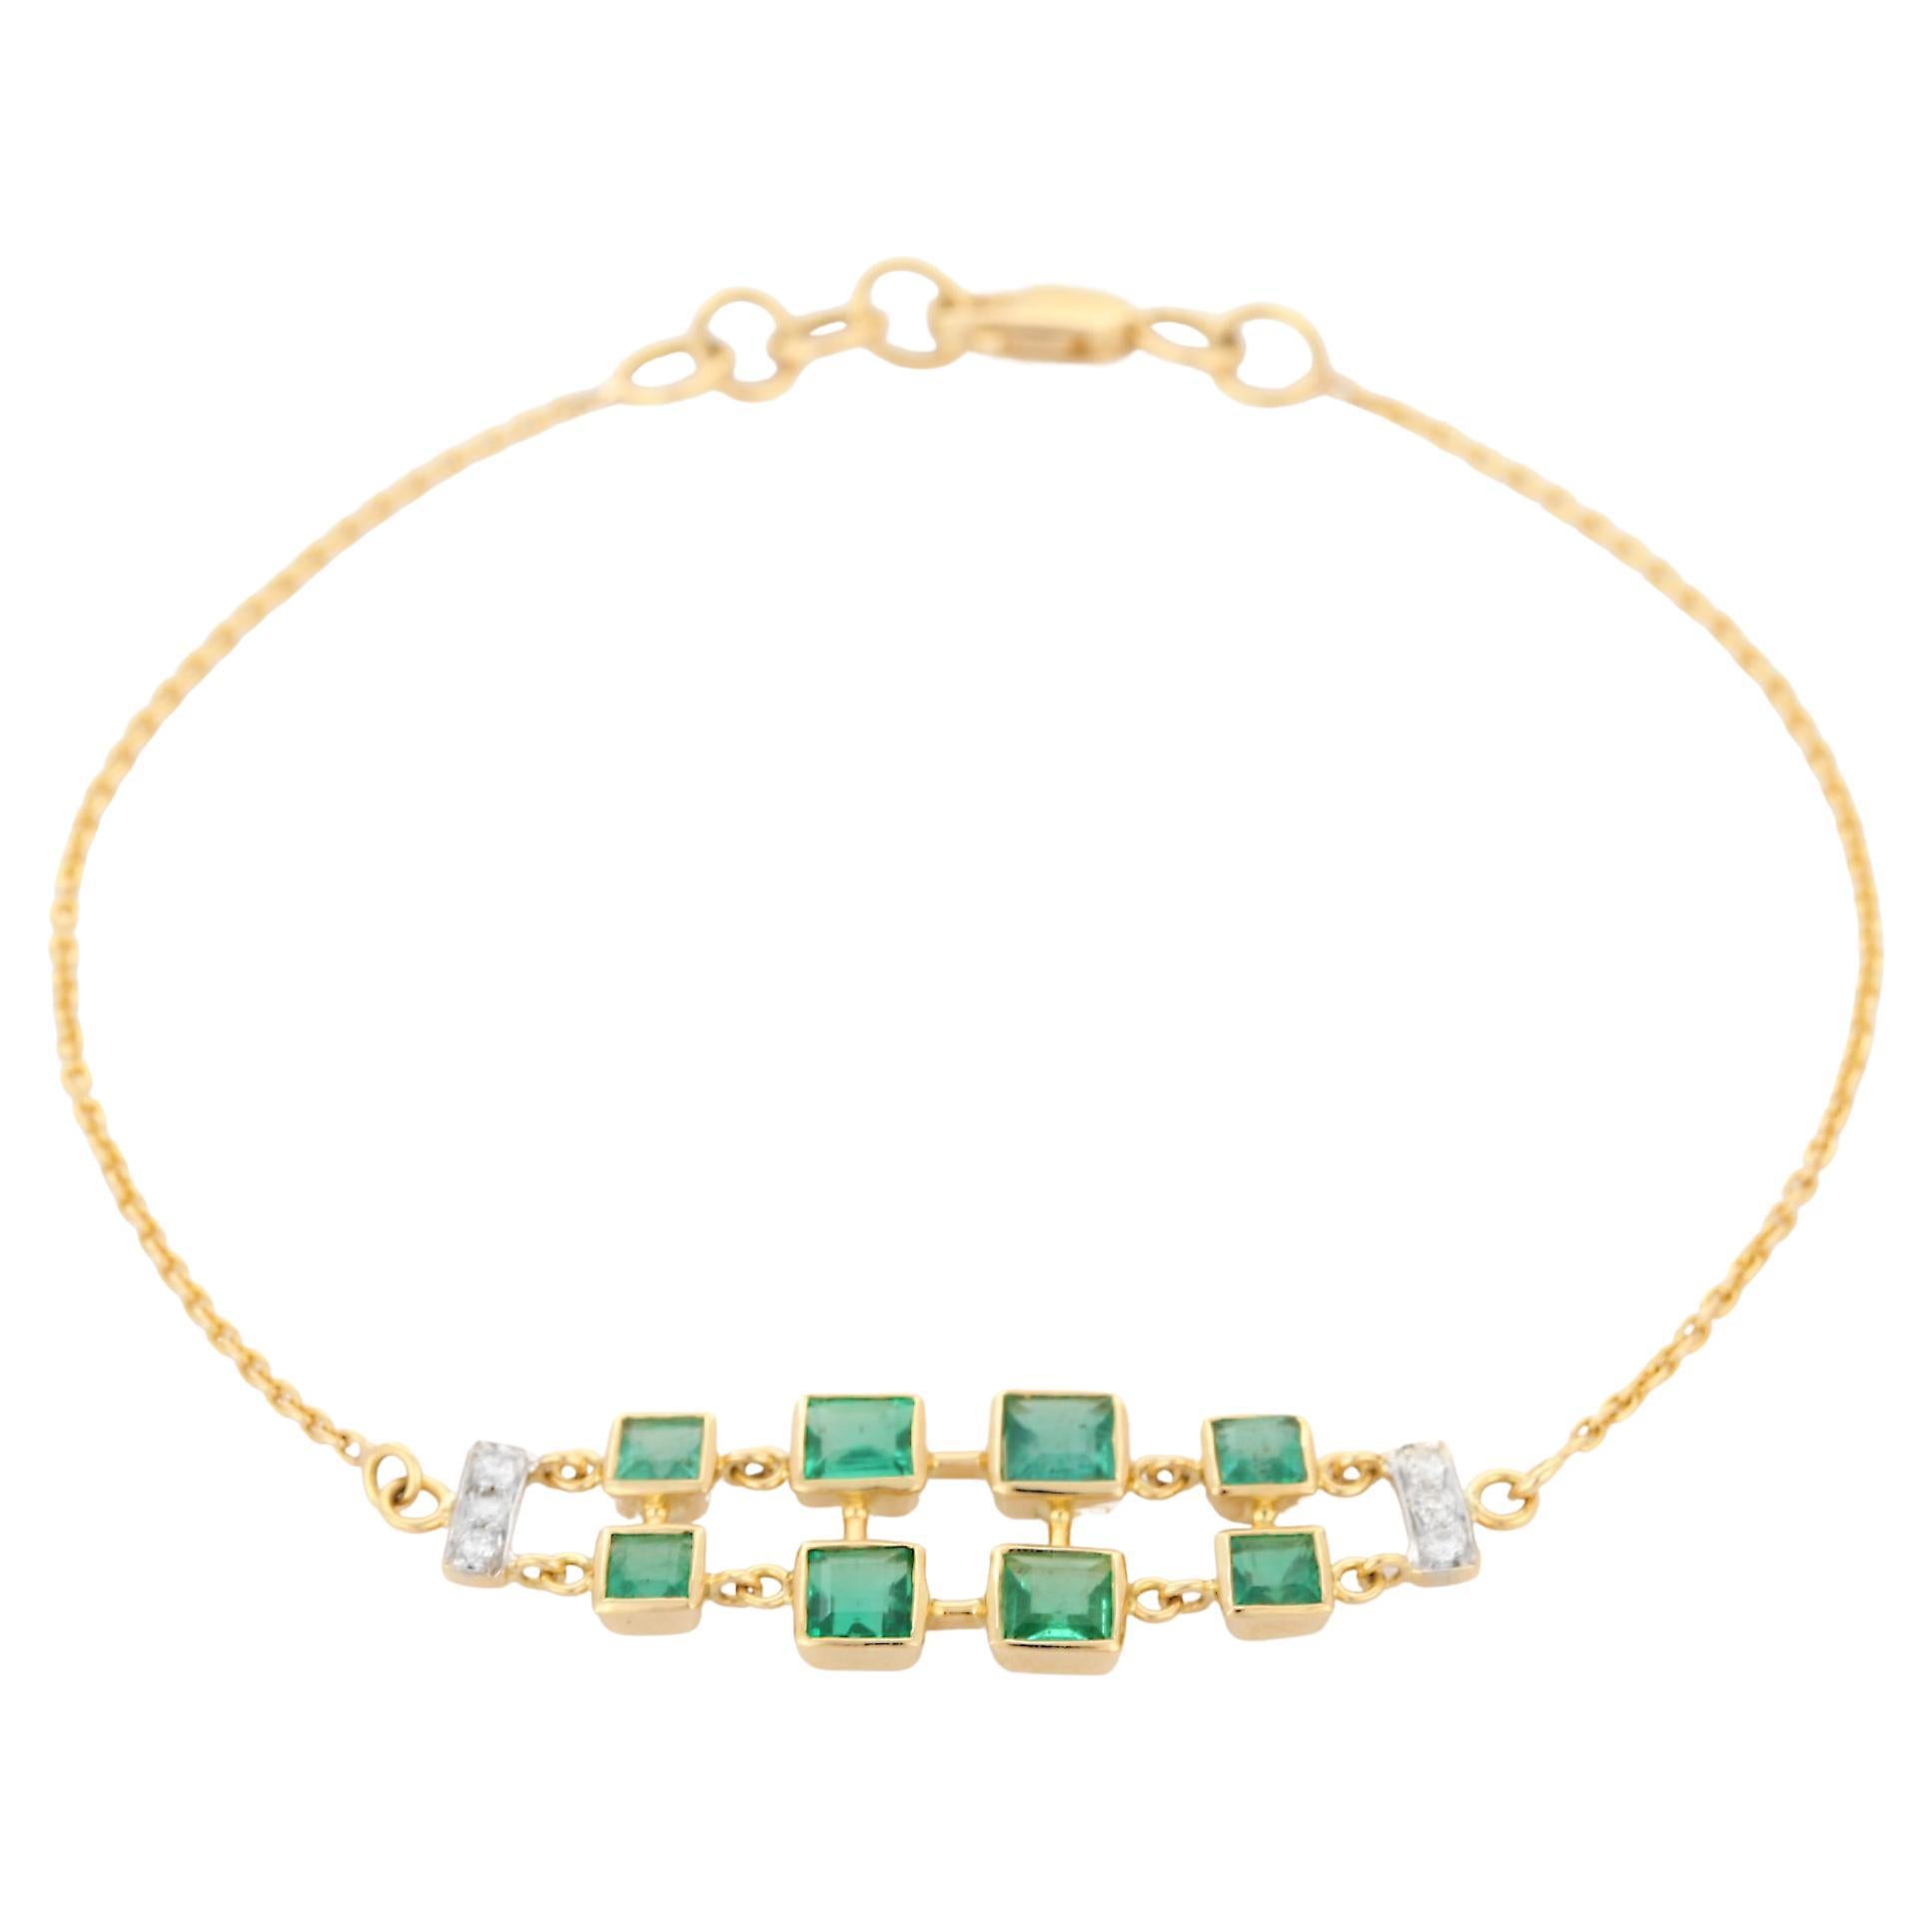 Distinctive Square Cut Emerald and Diamond Bracelet Studded in 18K Yellow Gold